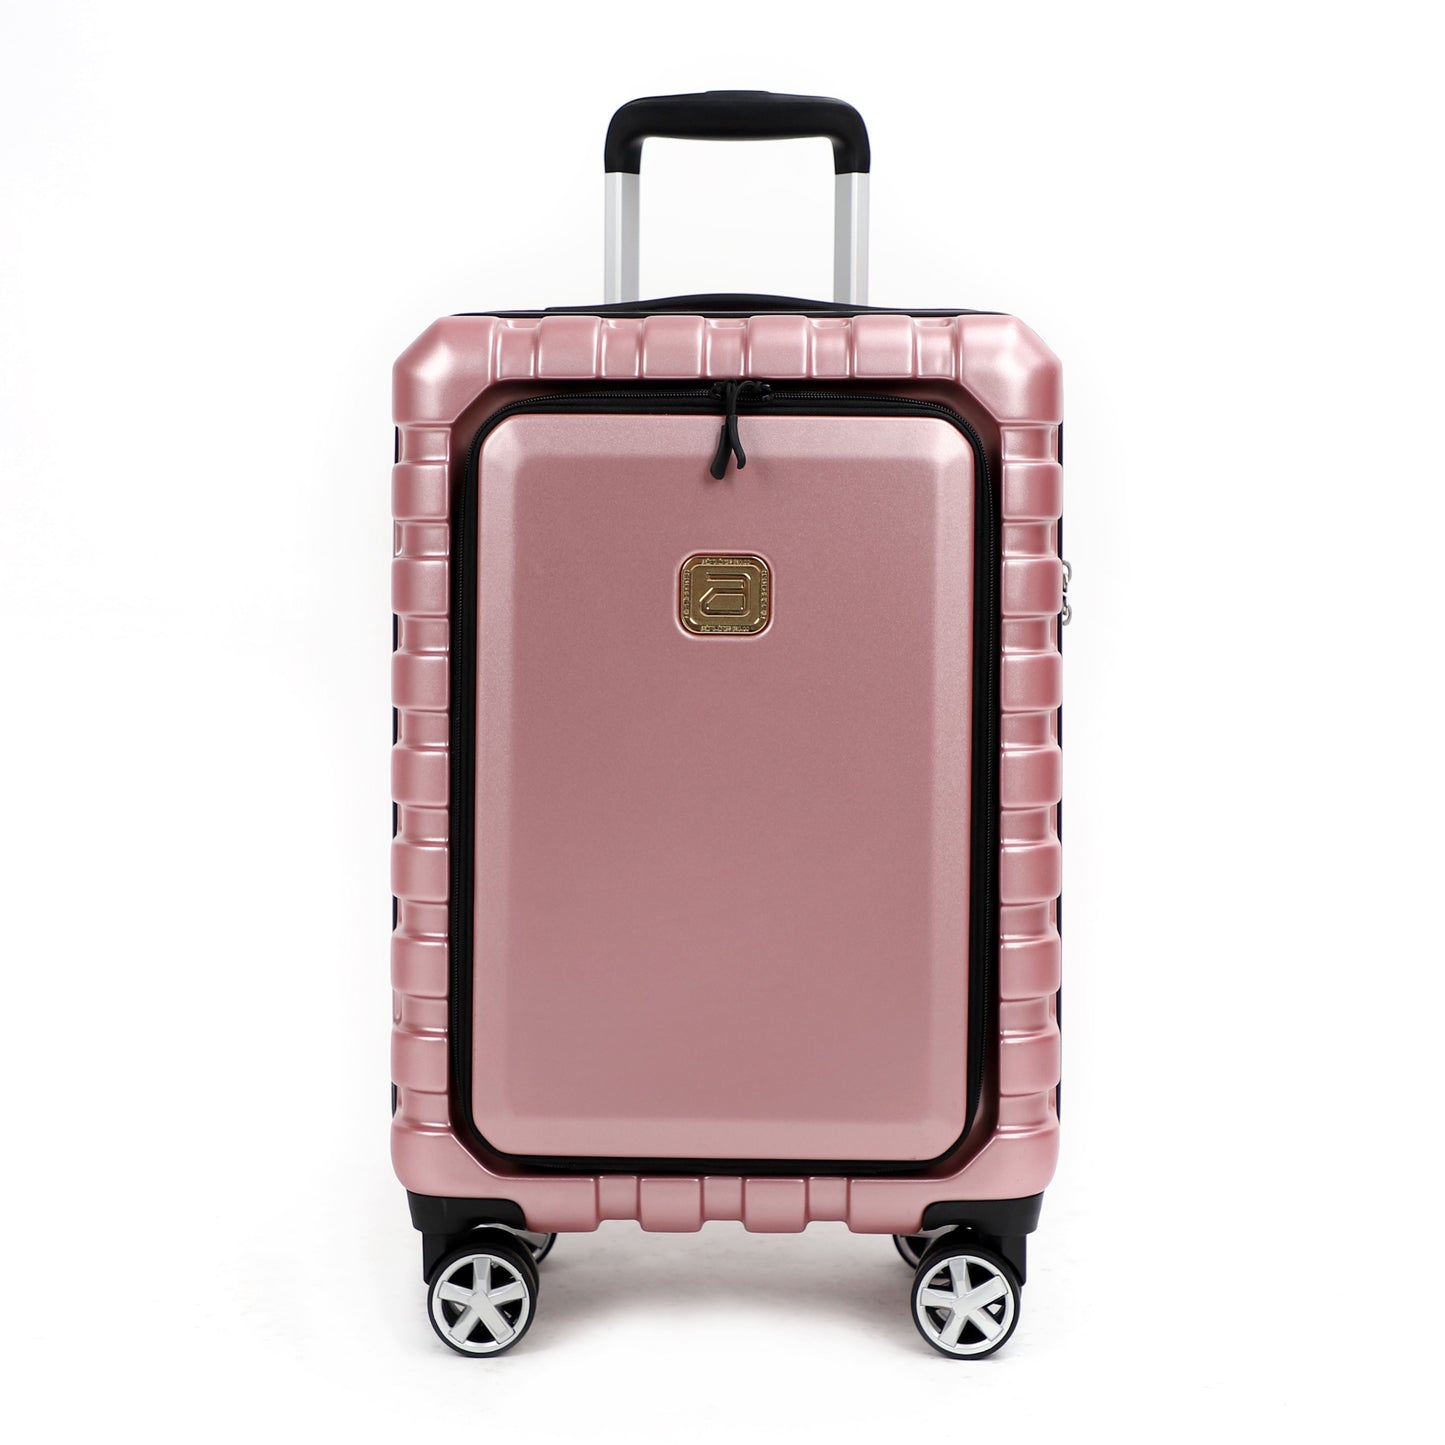 Airline_Carry_On_Luggage_Rose_Gold_front_view_20_inch_T1978155102